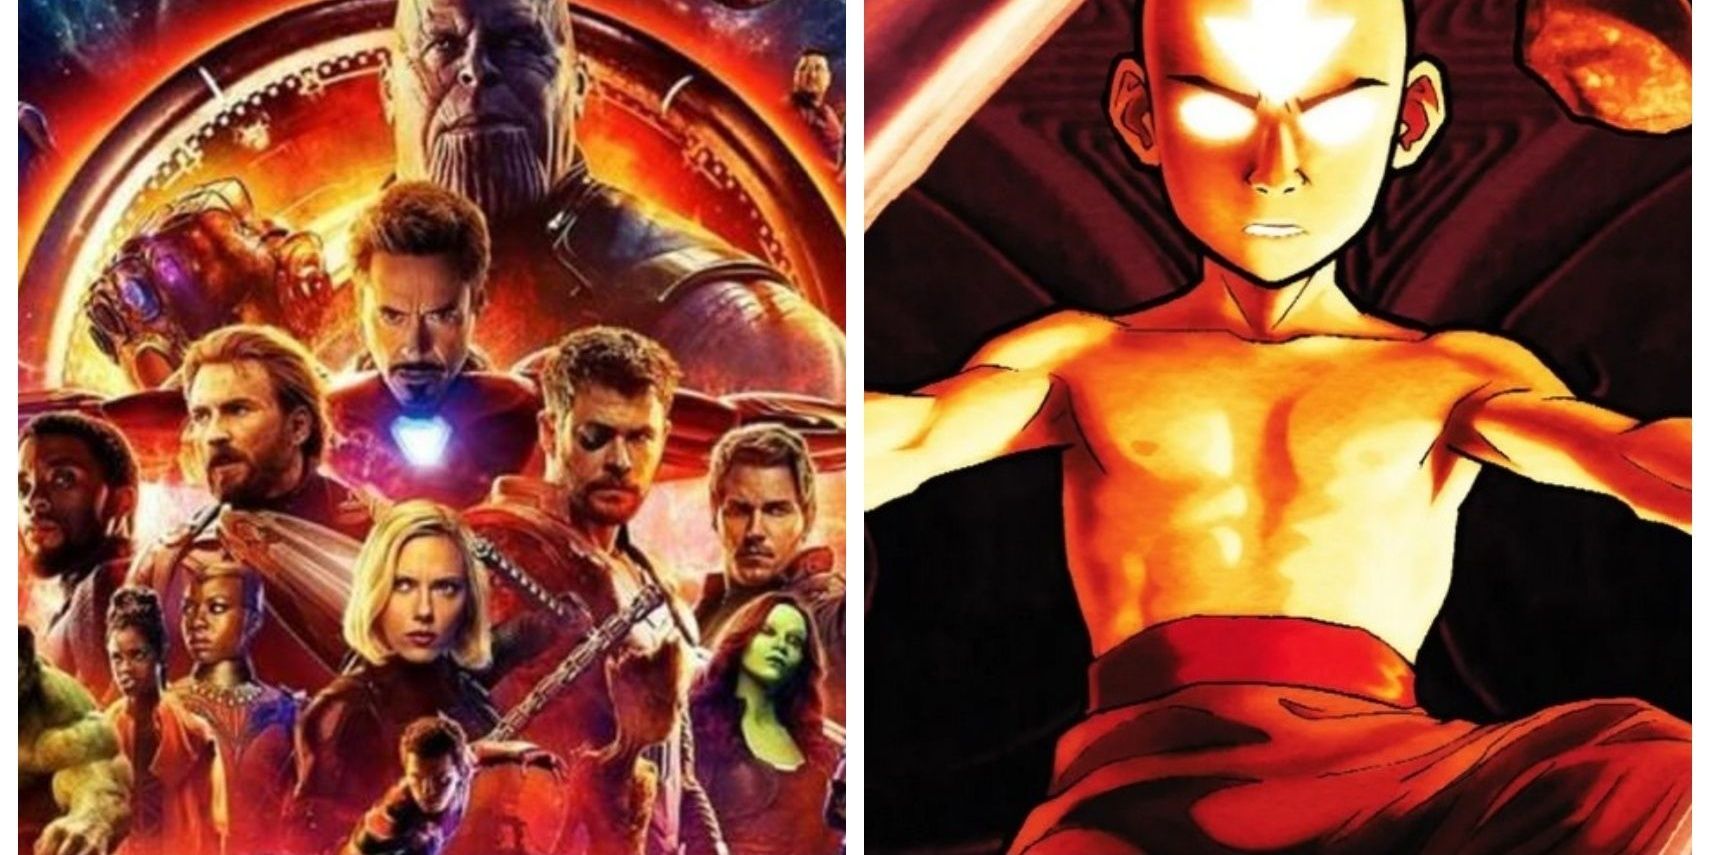 Endgame from MCU split with Aang from ATLA in the Avatar State